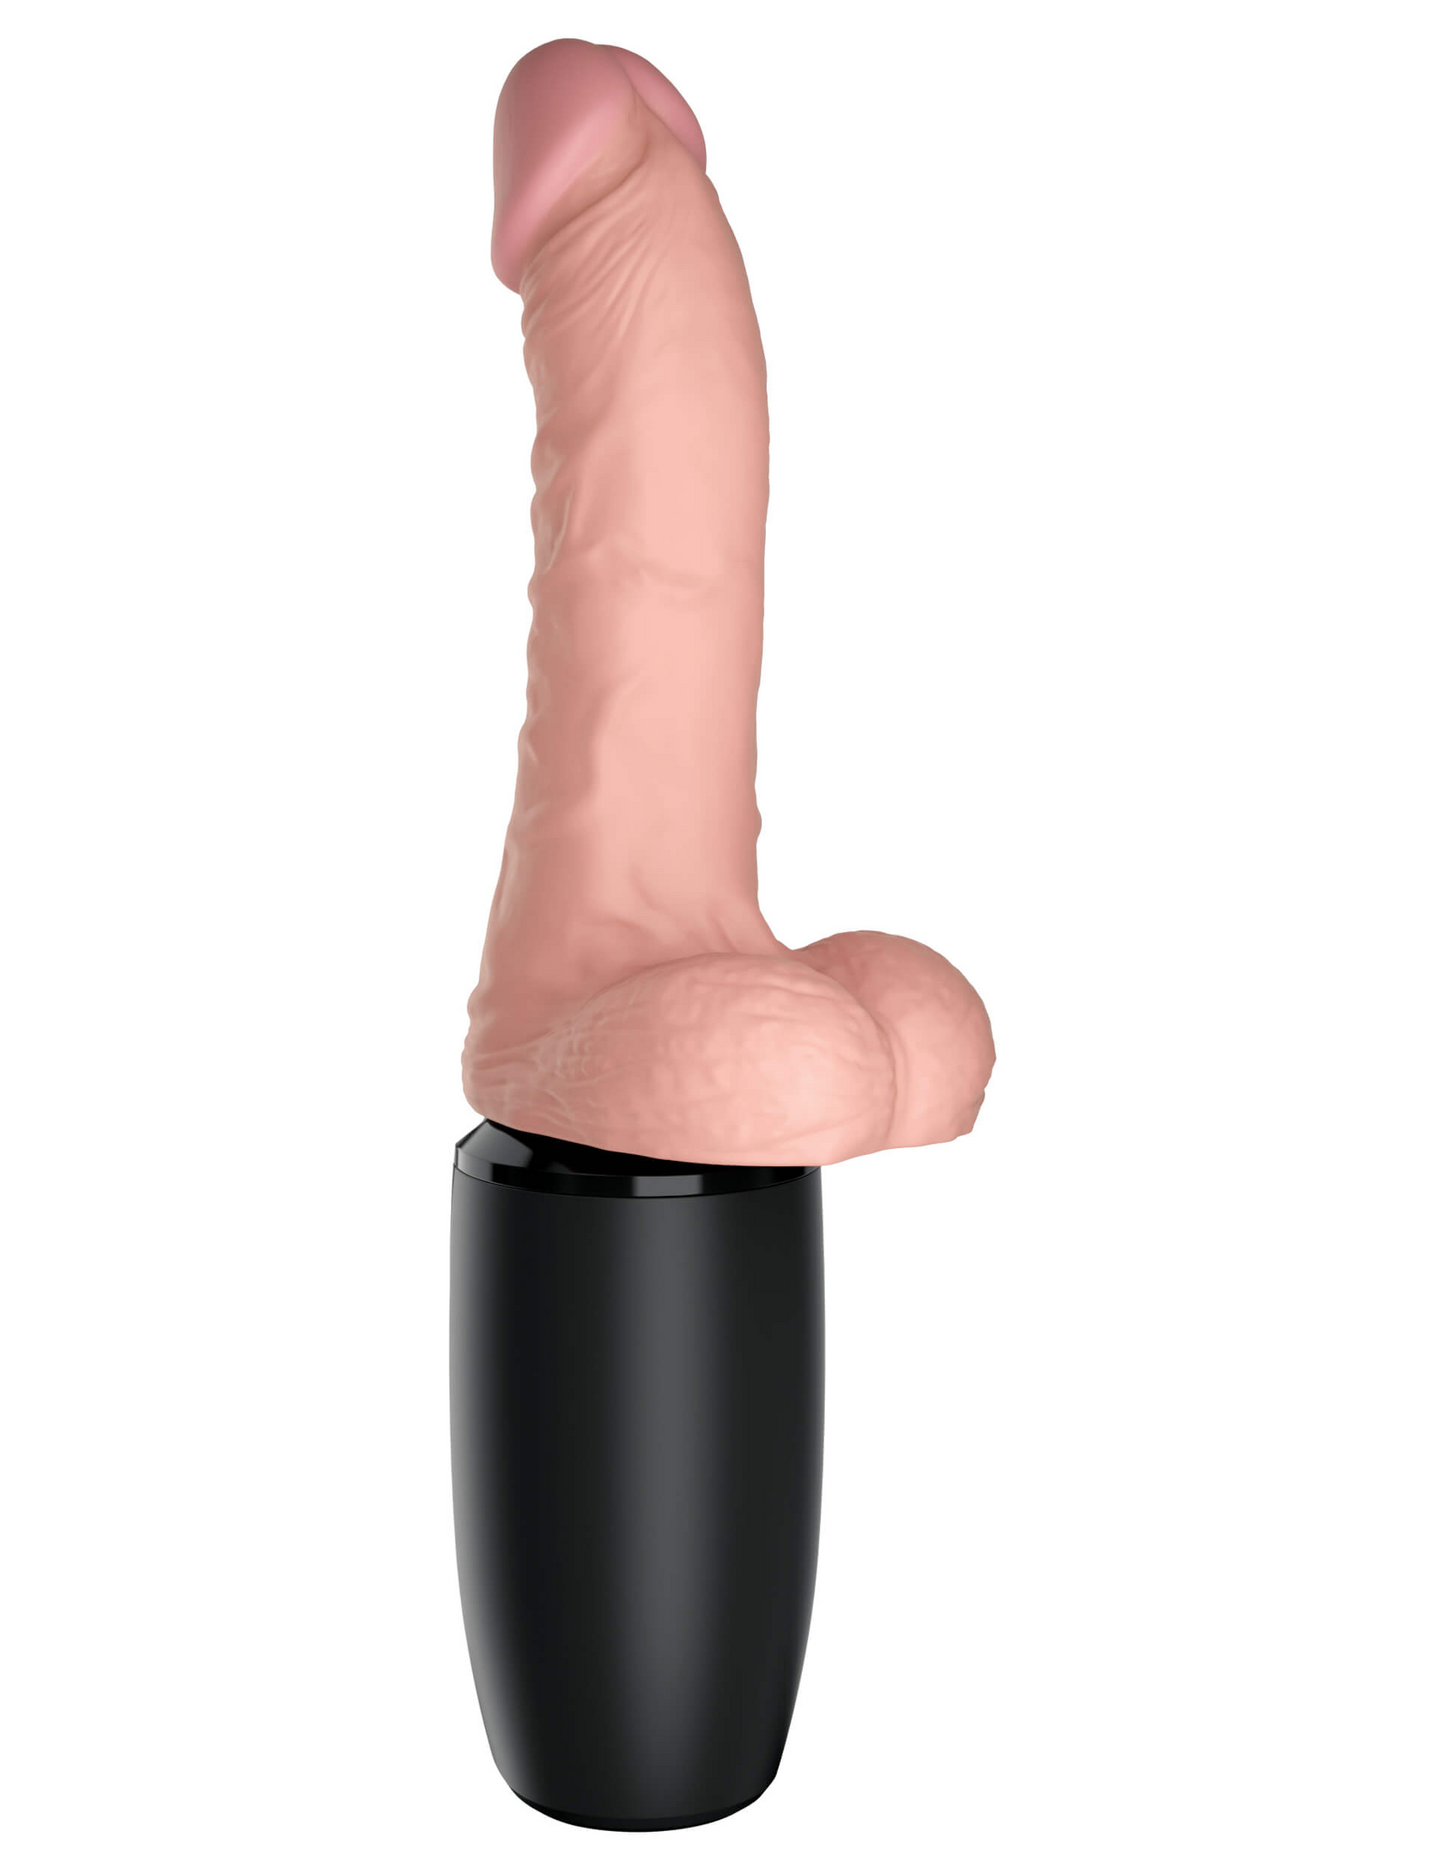 King Cock Thrusting Cock  6.5 Inch With Balls